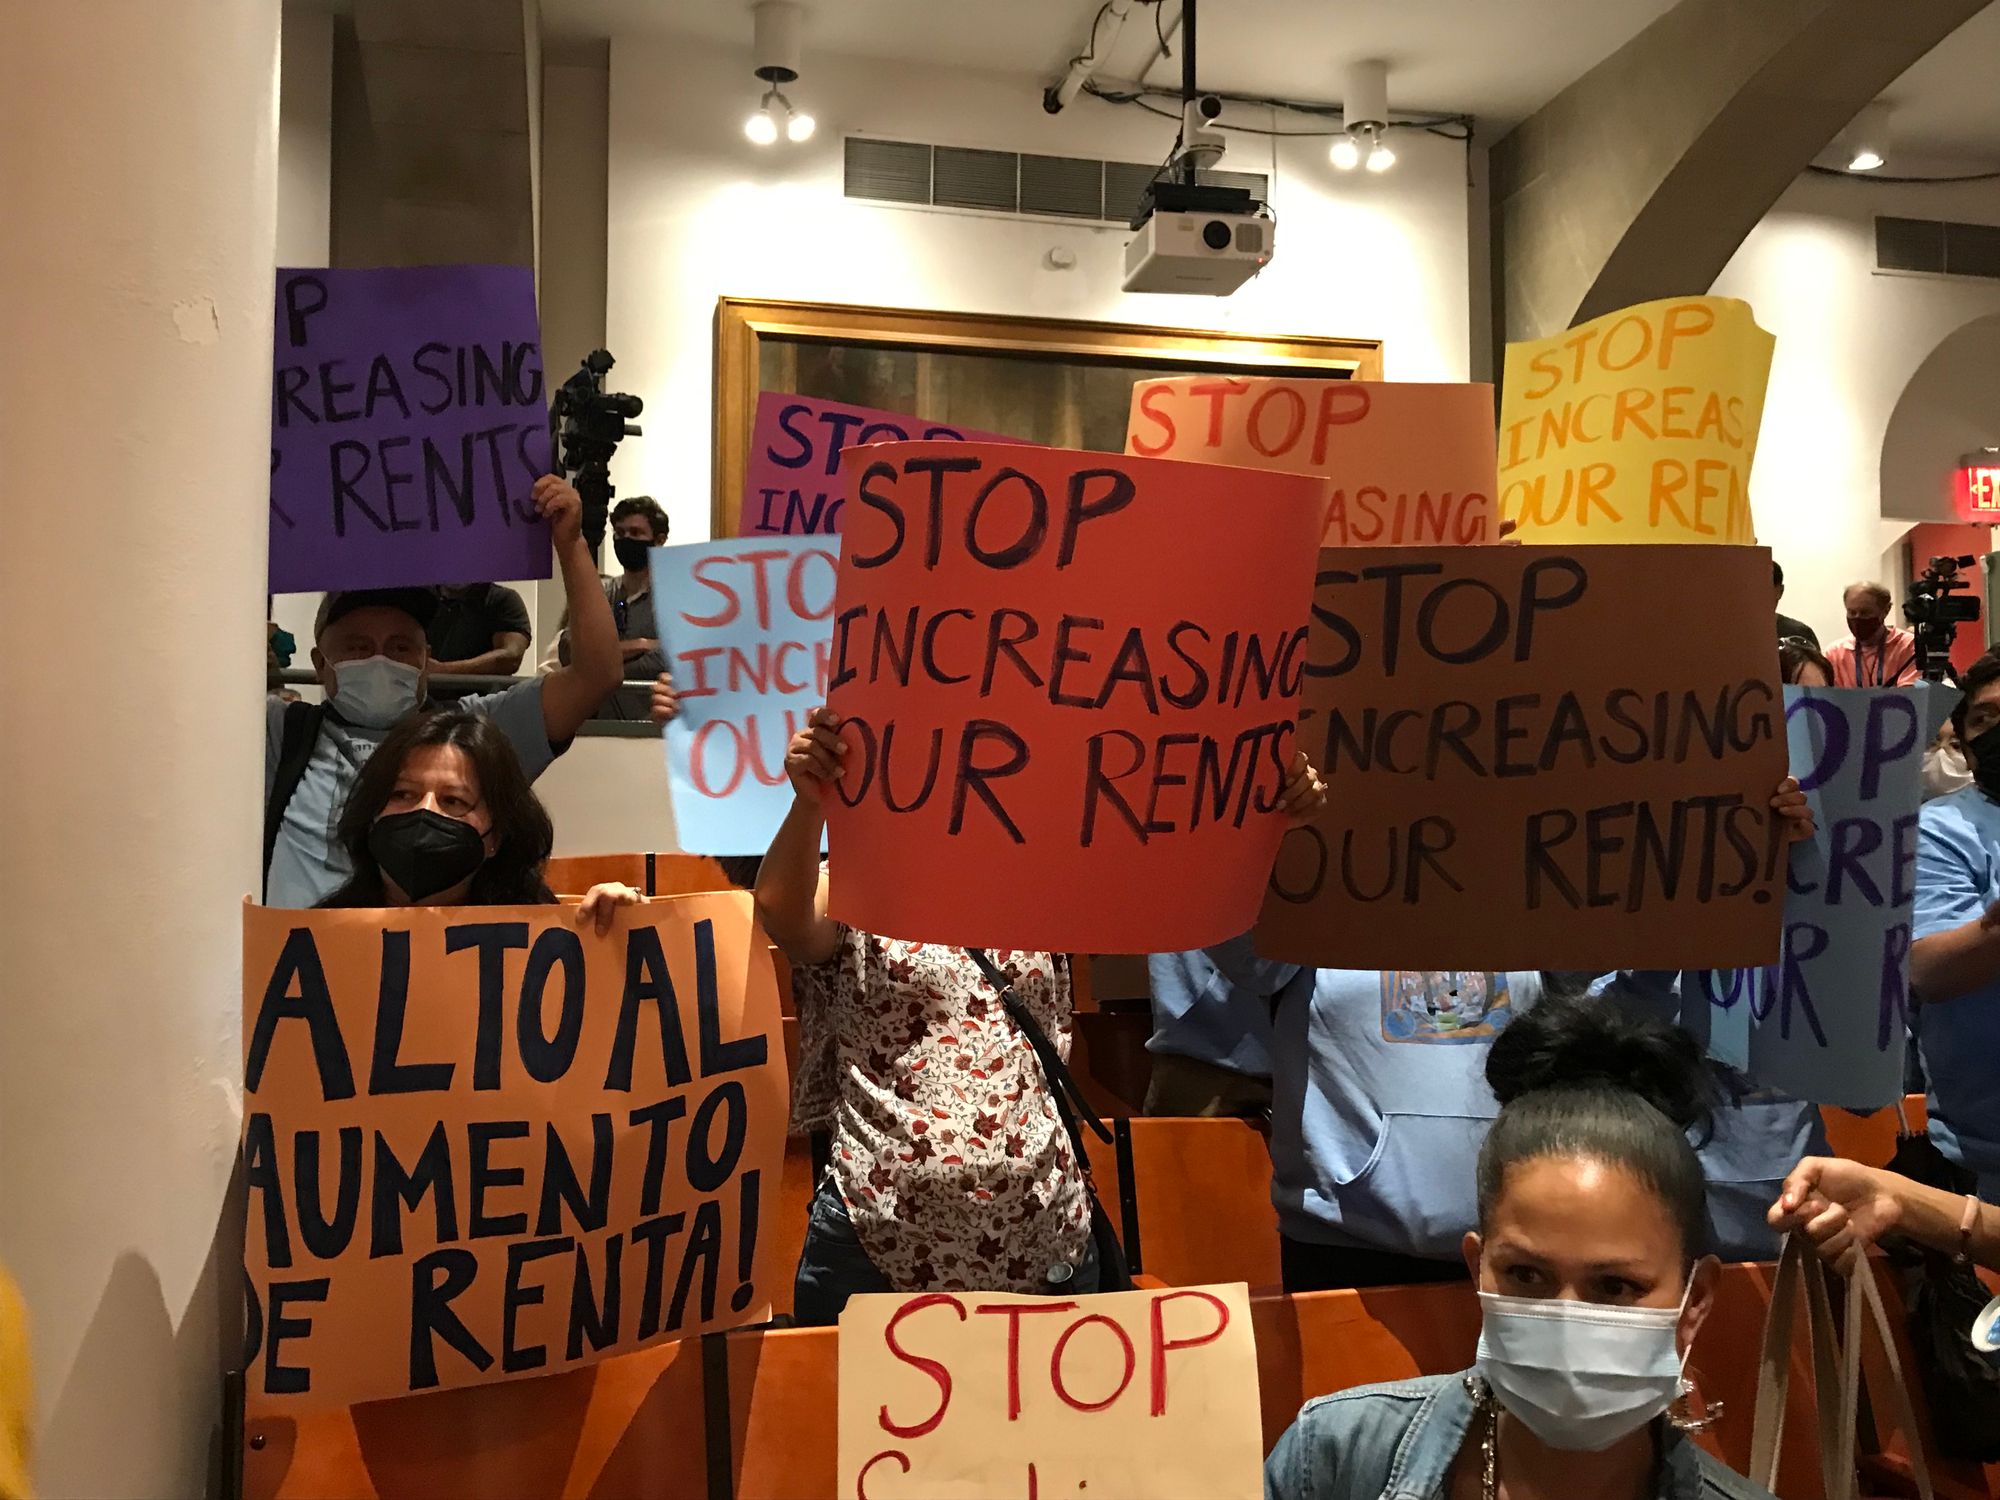 Tenants hold signs that say "stop increasing our rents" during the RGB vote on Tuesday night.